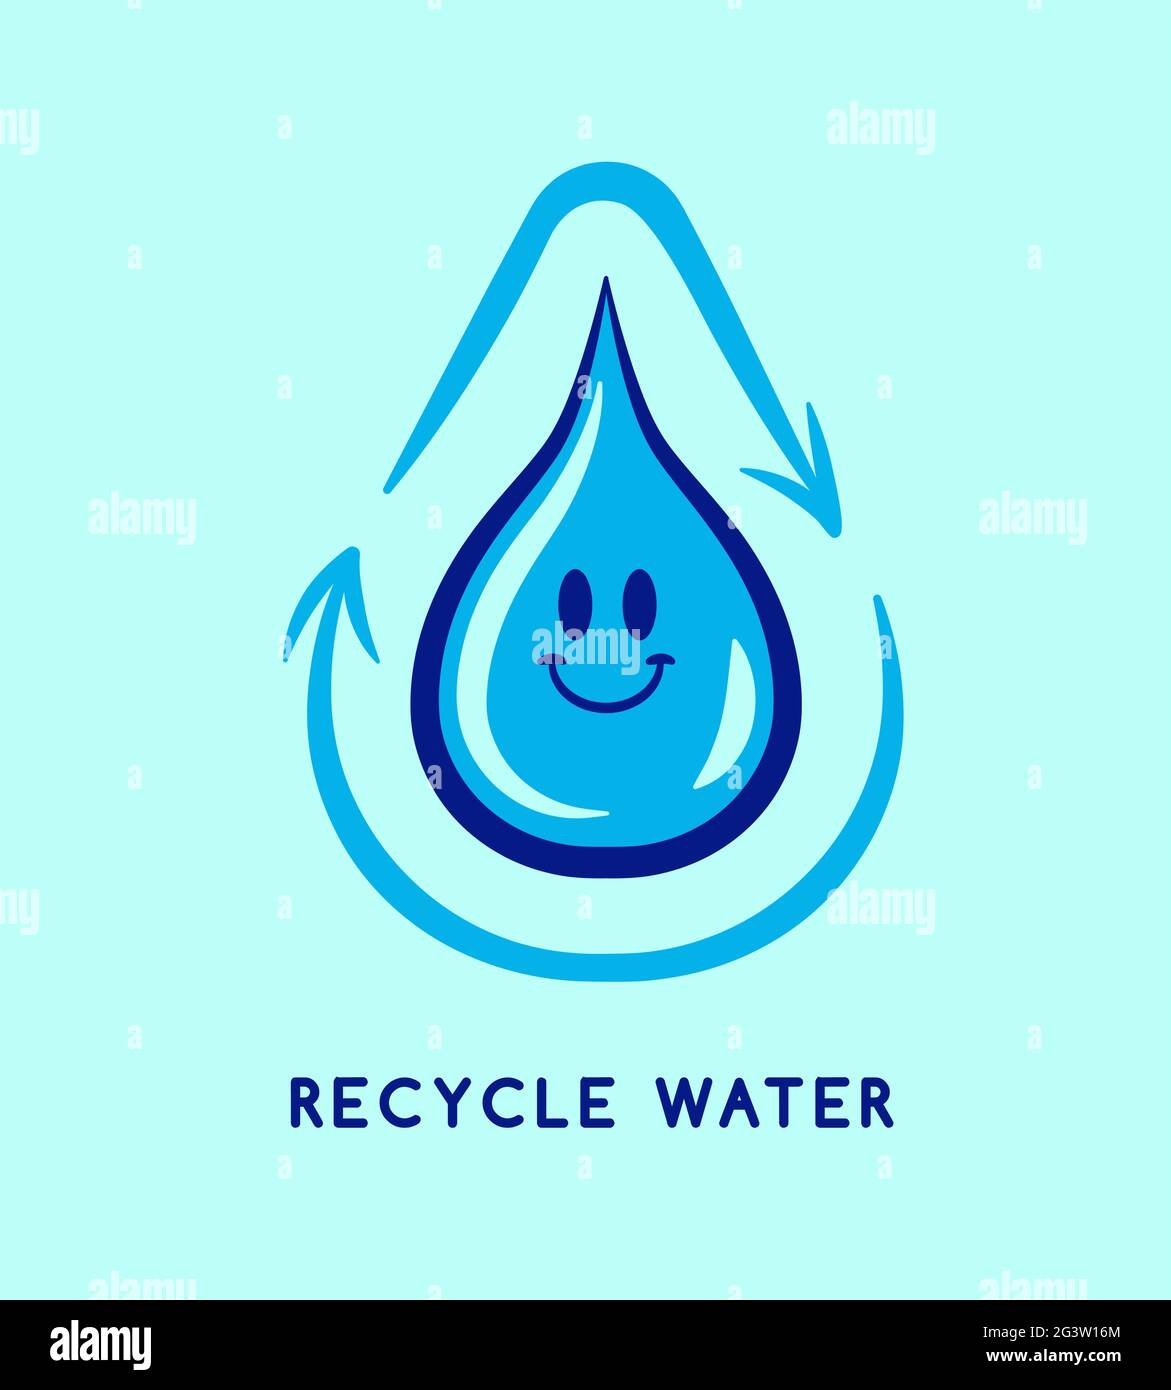 Recycle water illustration concept for eco friendly environment care campaign. Home waste reuse cycle design. Funny retro cartoon blue liquid drop cha Stock Vector